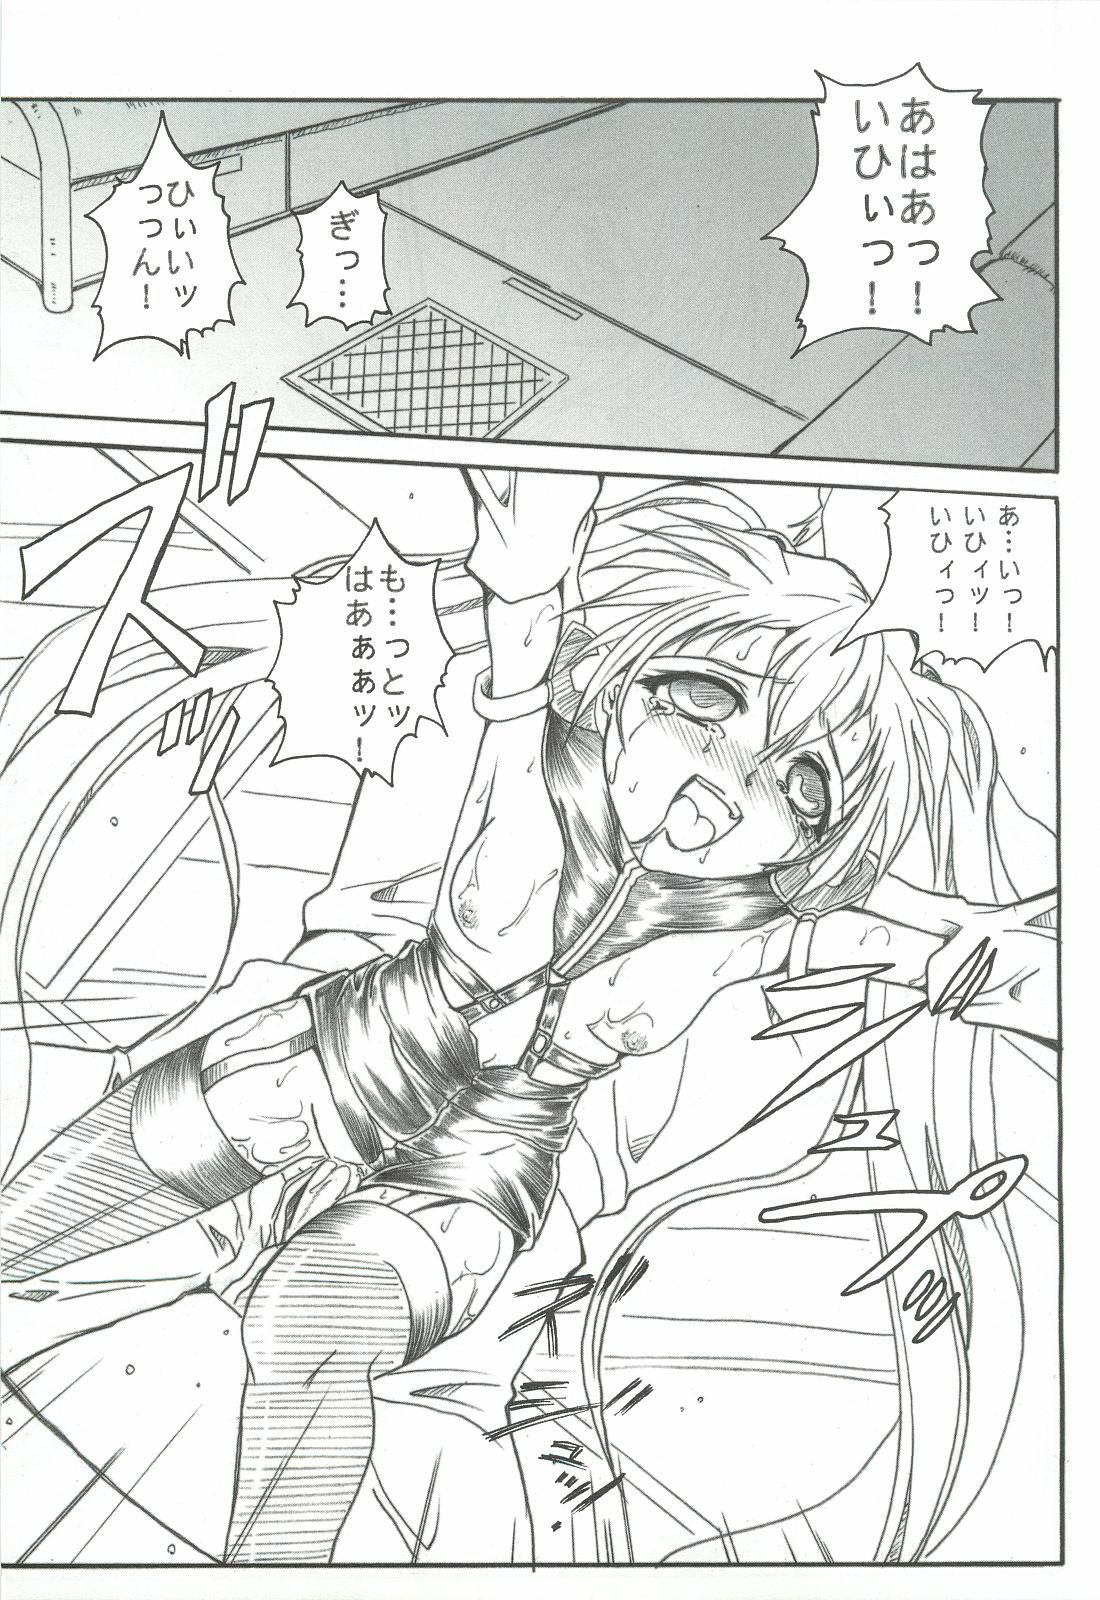 Hot Chicks Fucking SOLID STATE 8 - Martian successor nadesico Candid - Page 8